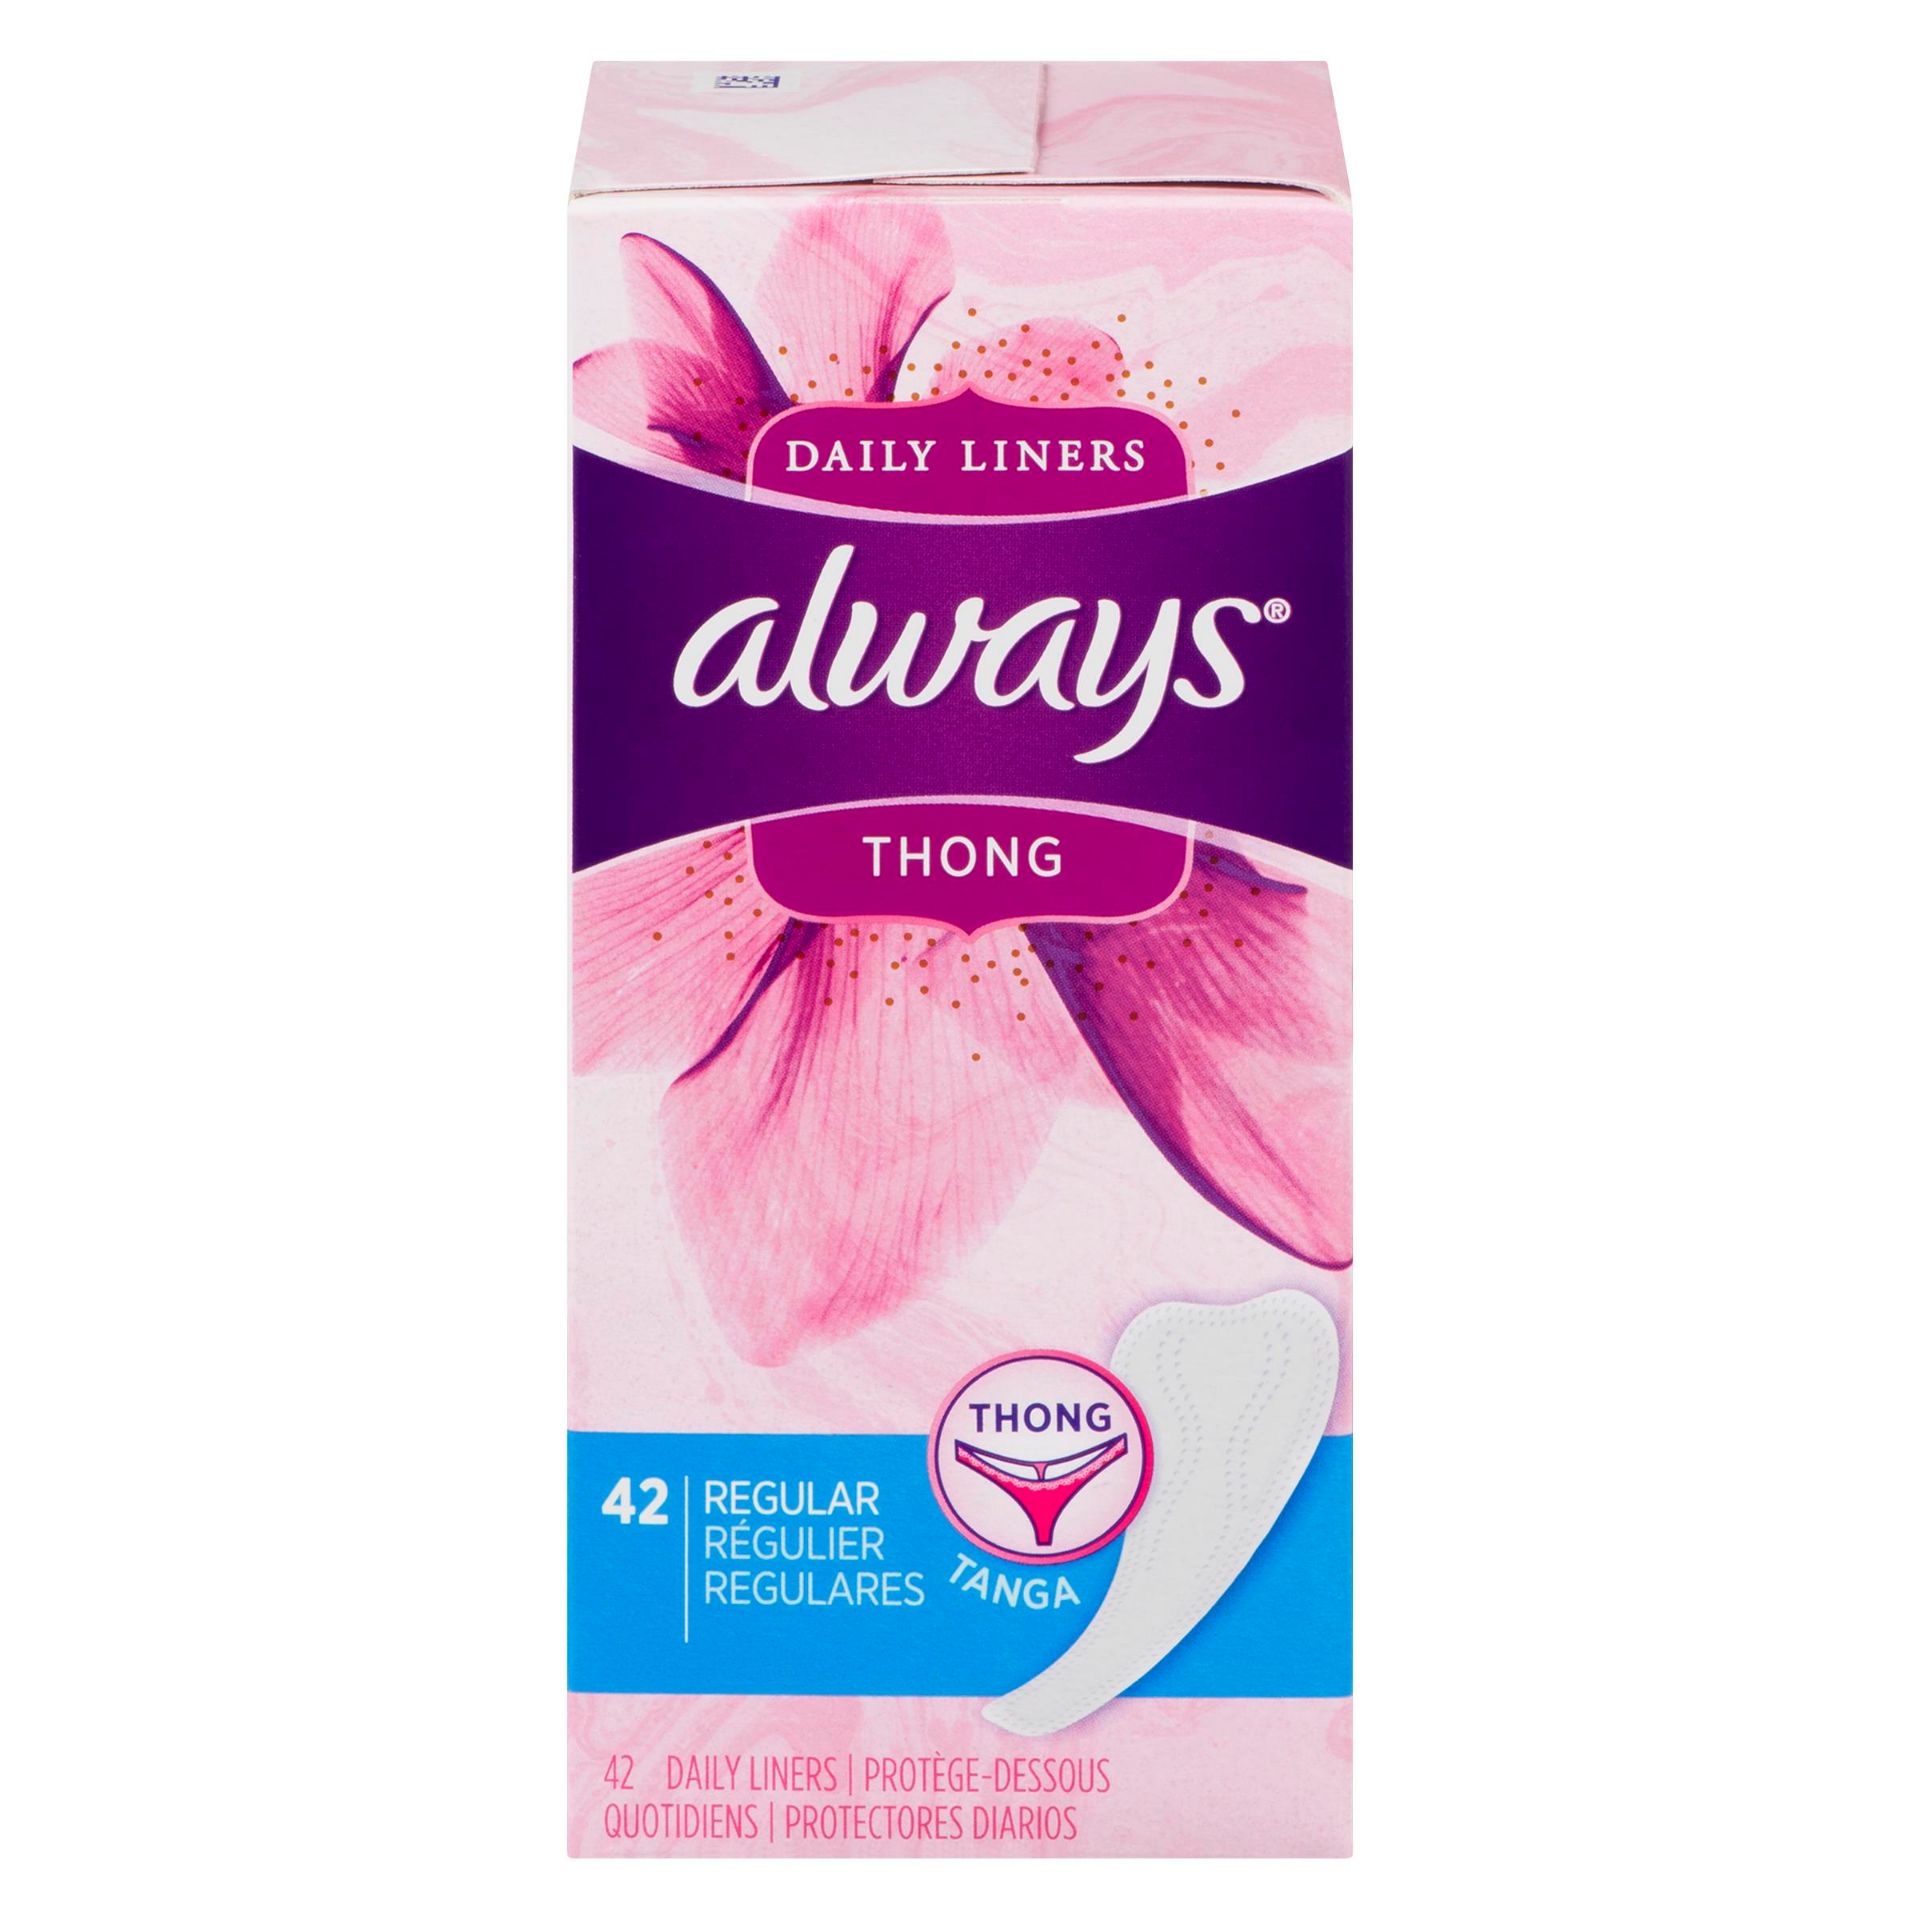 Pharmasave  Shop Online for Health, Beauty, Home & more. ALWAYS THONG  DAILY LINERS REGULAR UNSCENTED 42S